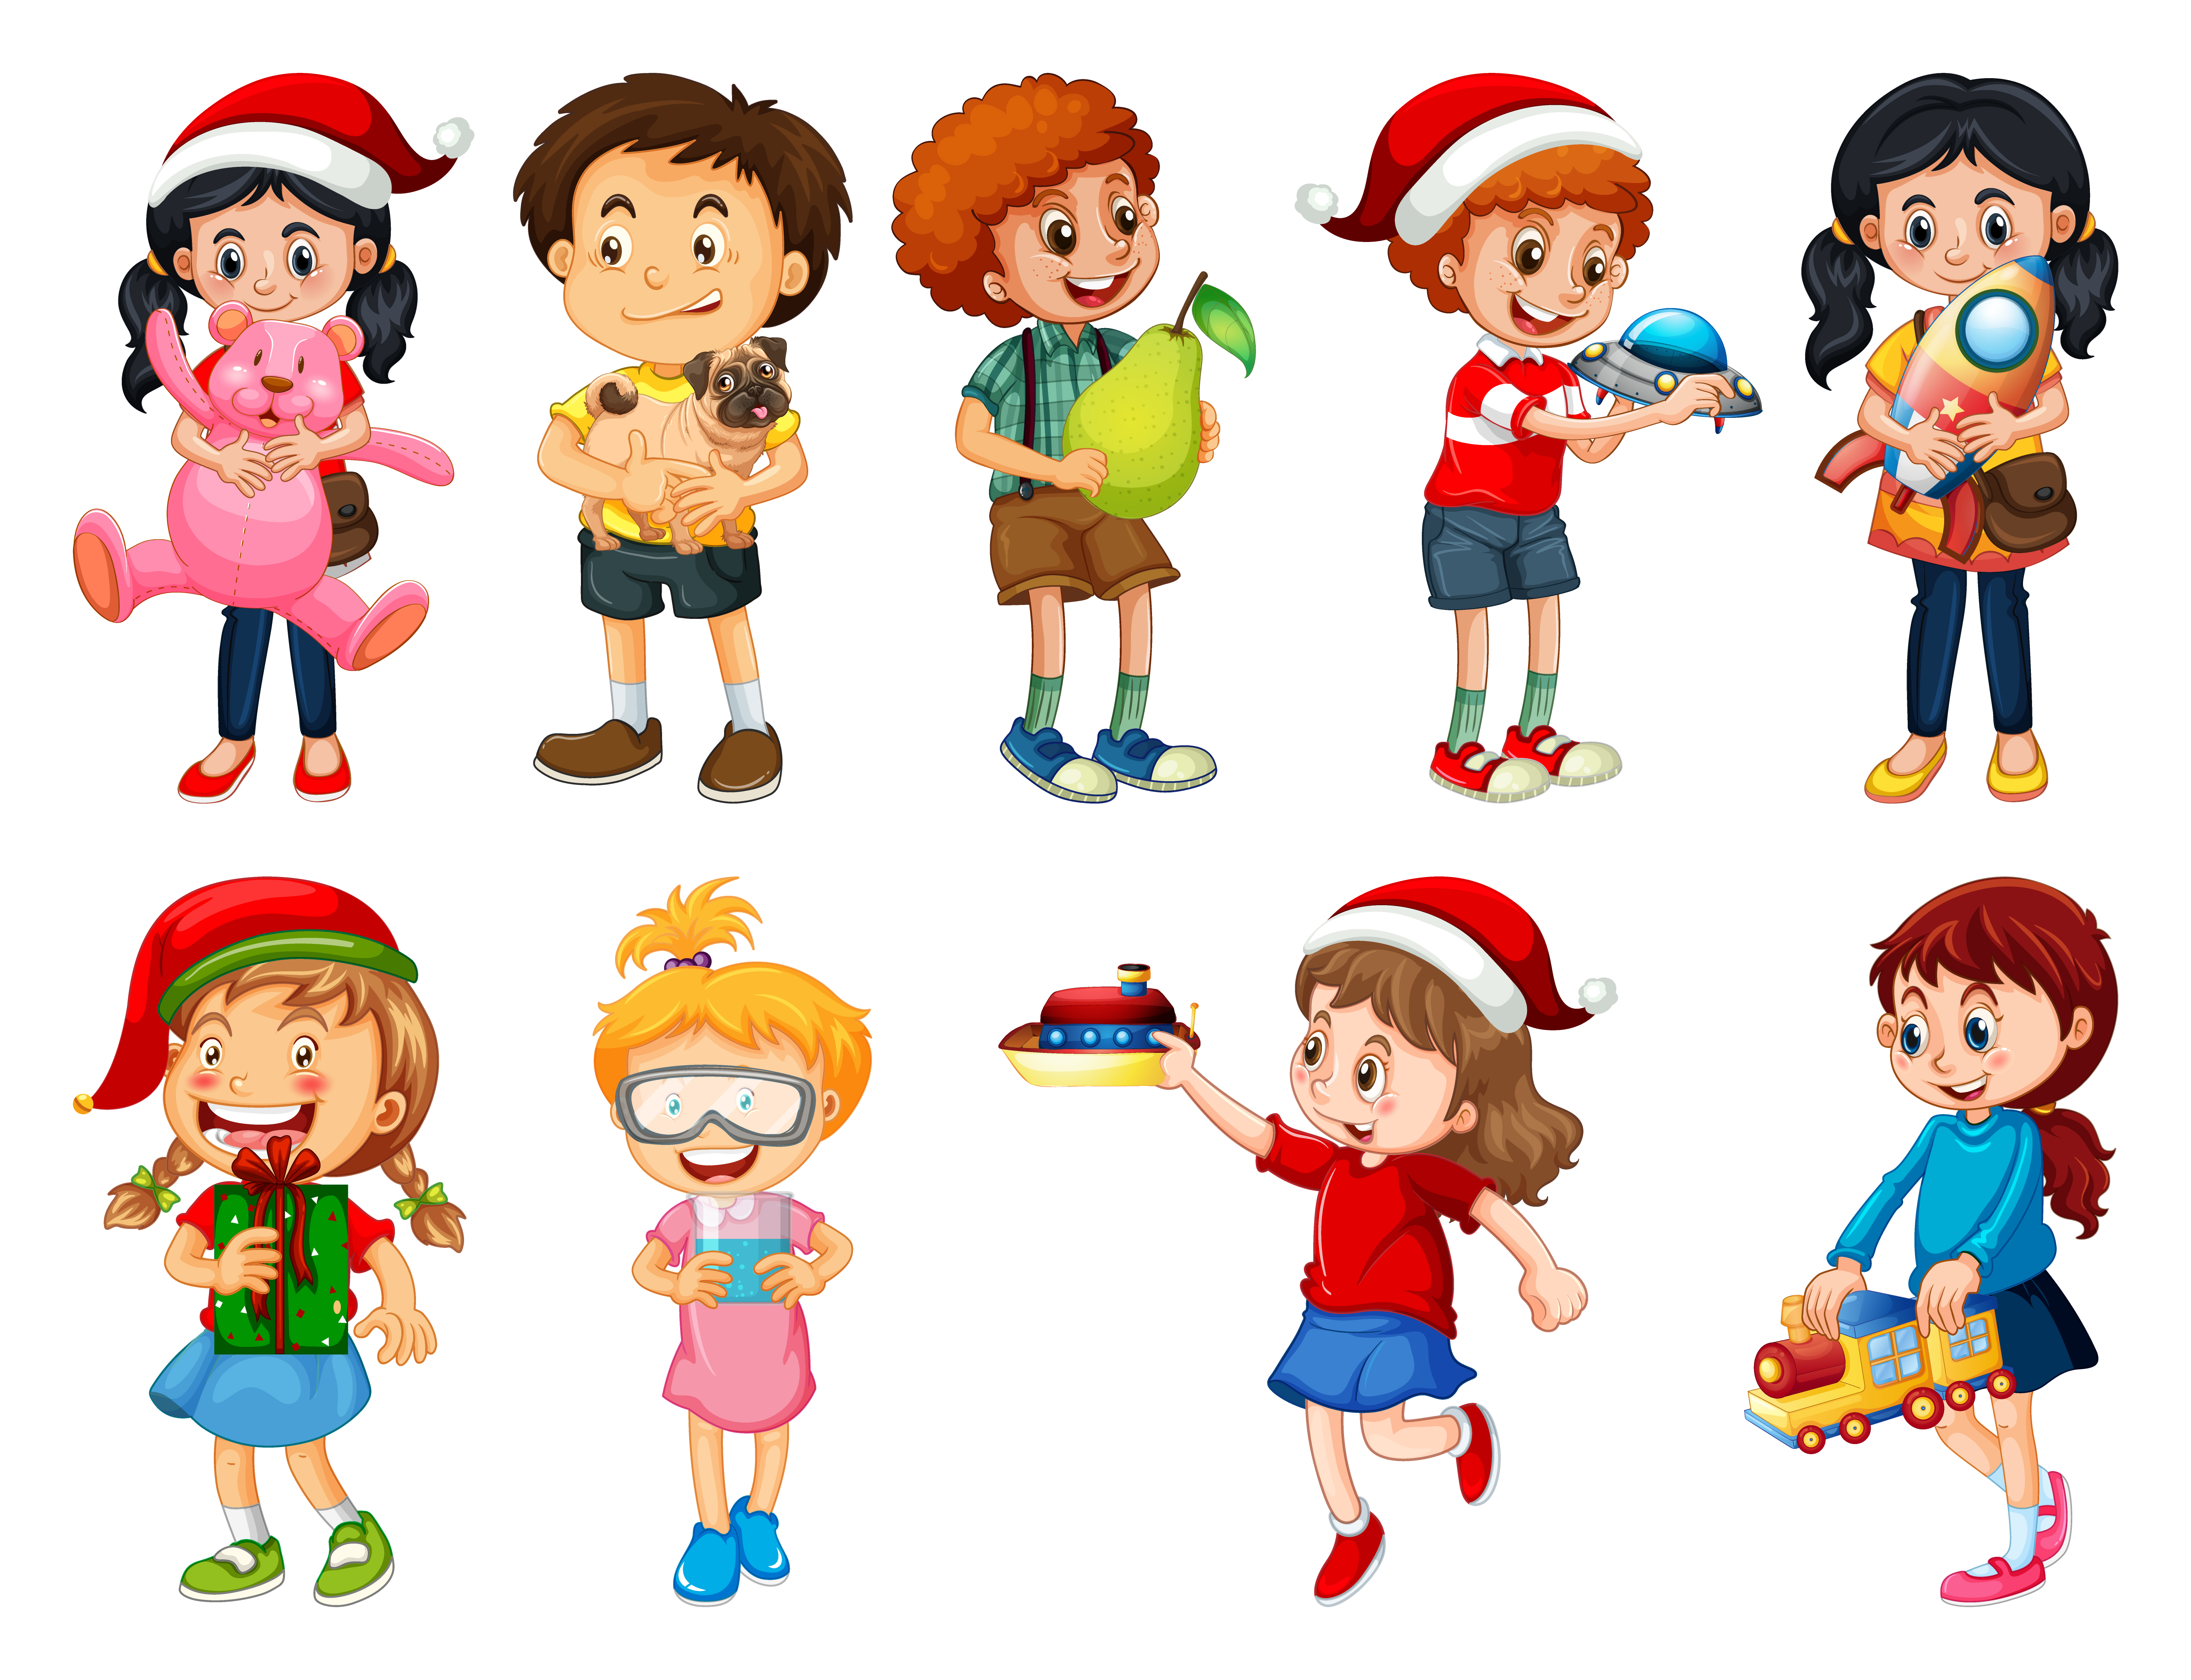 Cartoon Child Images Free Download